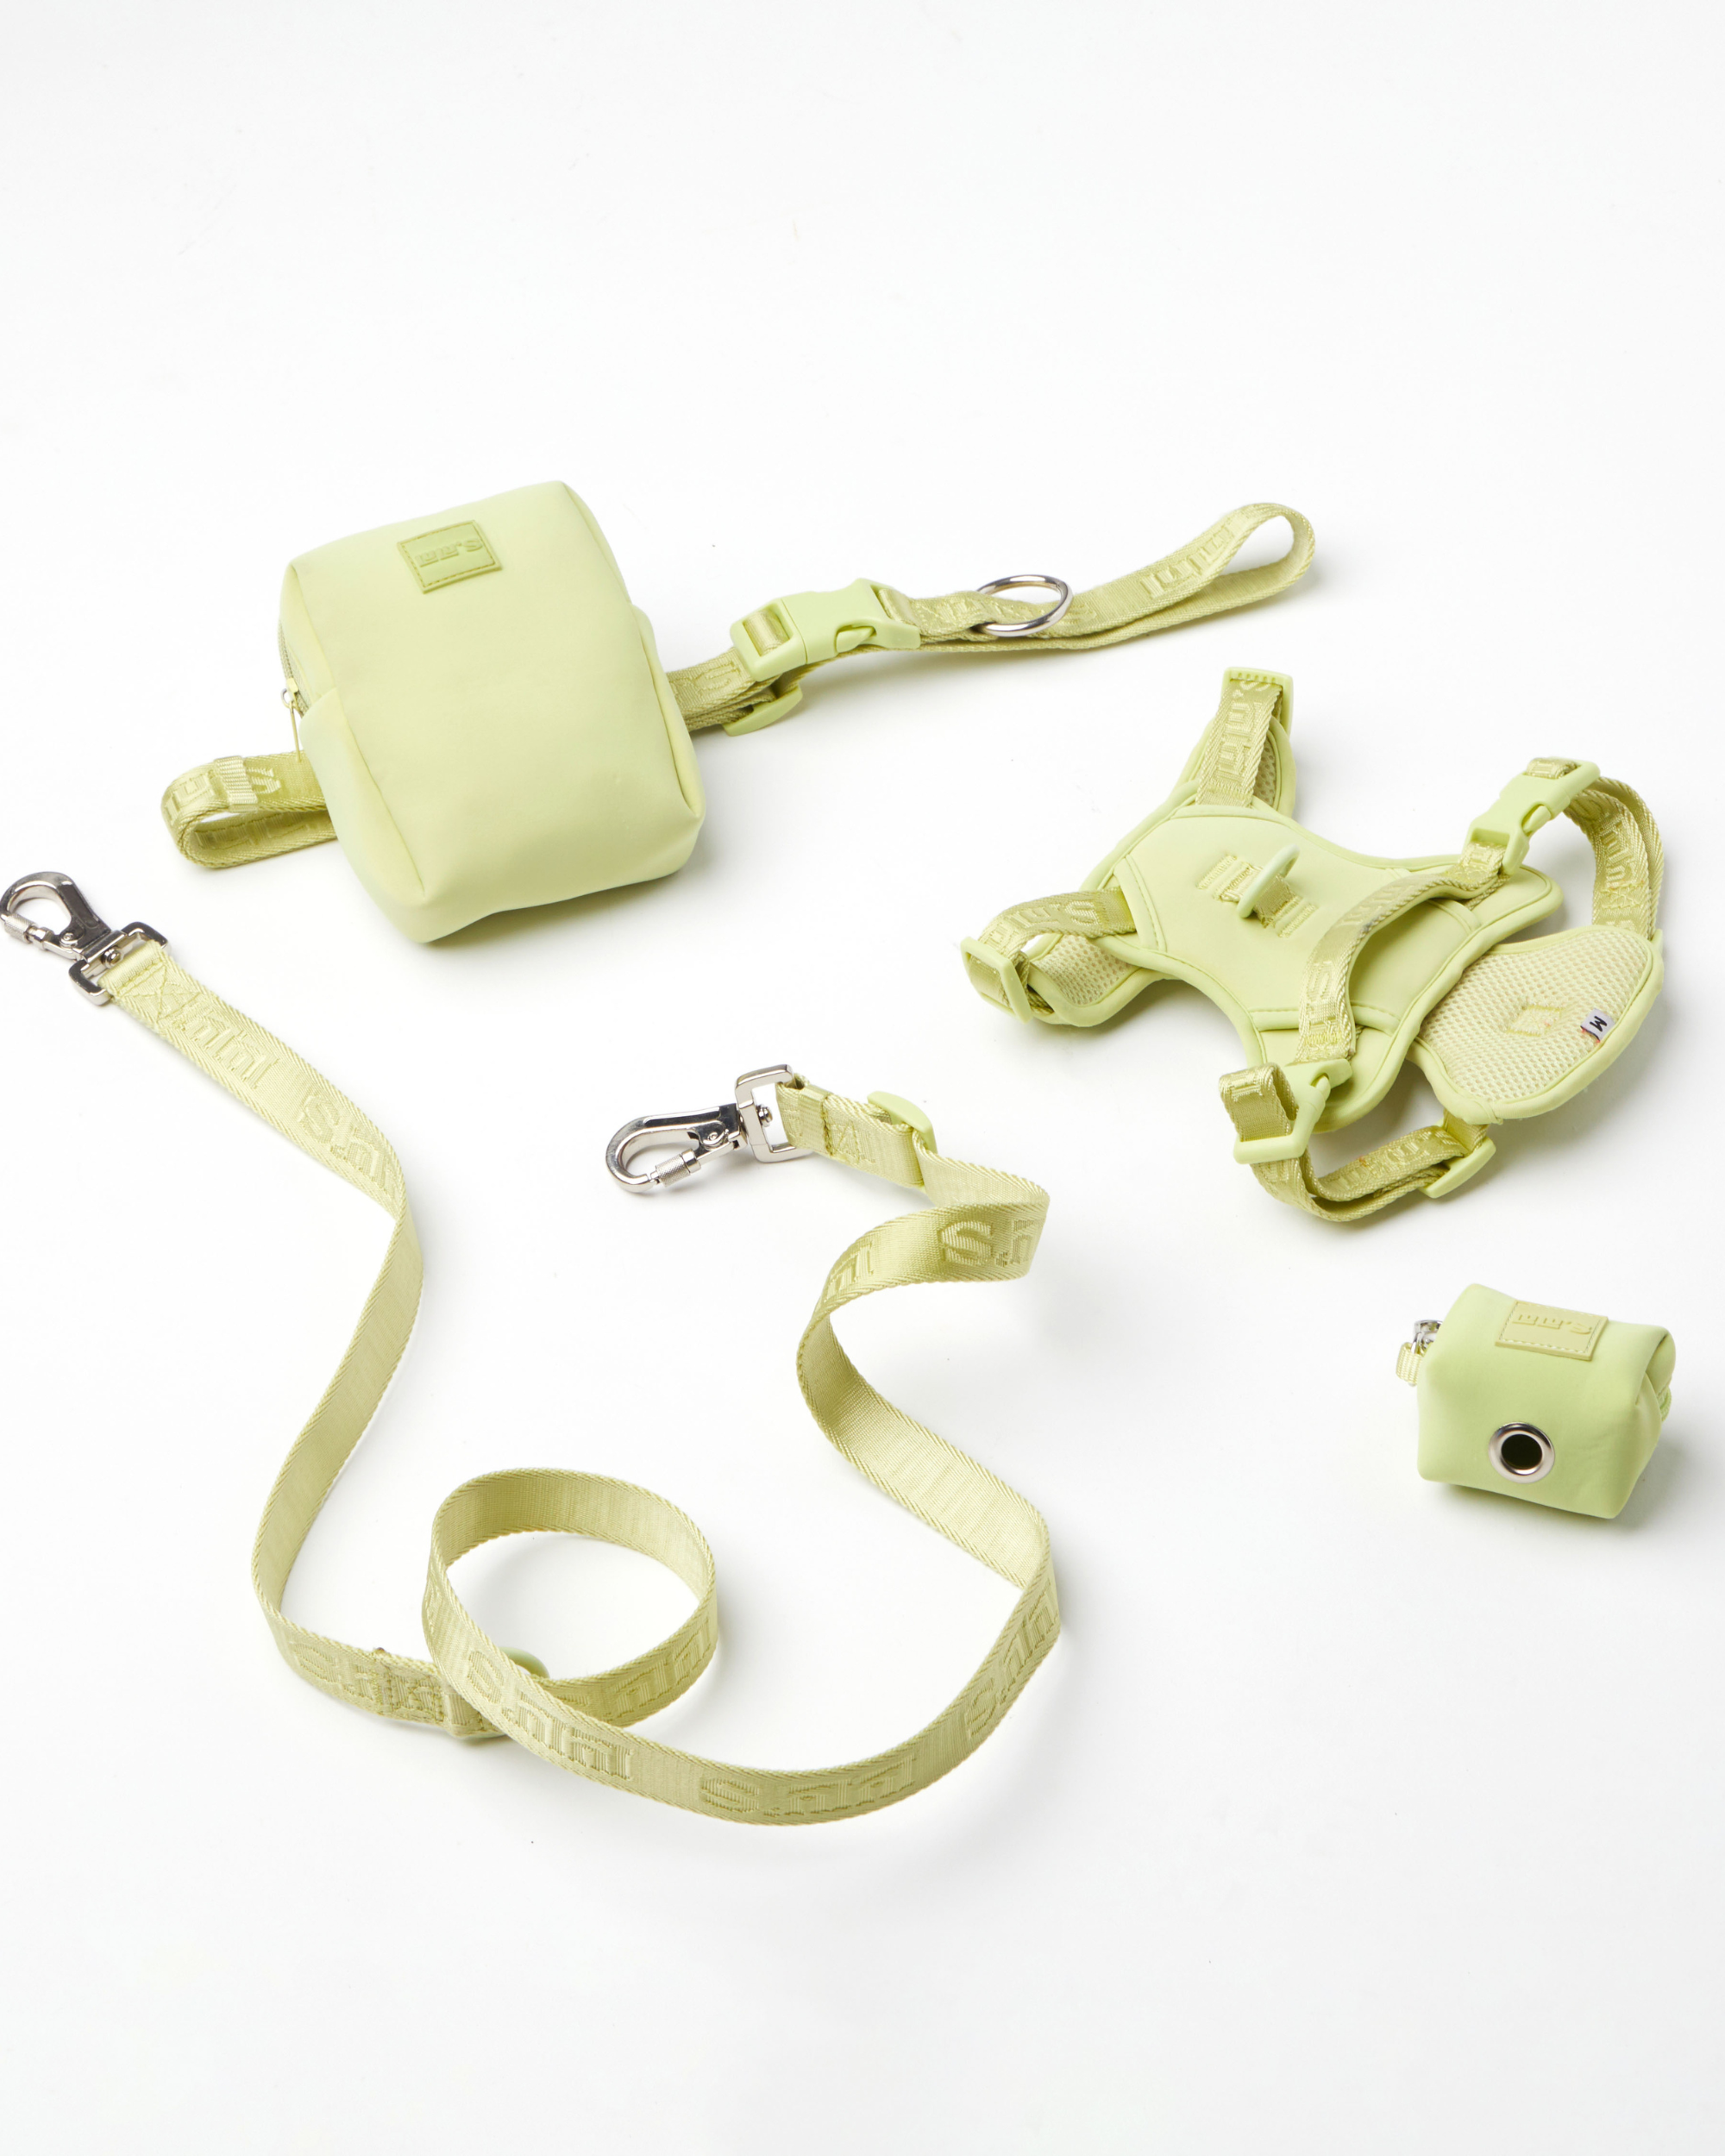 Matcha Green dog harness, leash, and accessories set by Lulu's